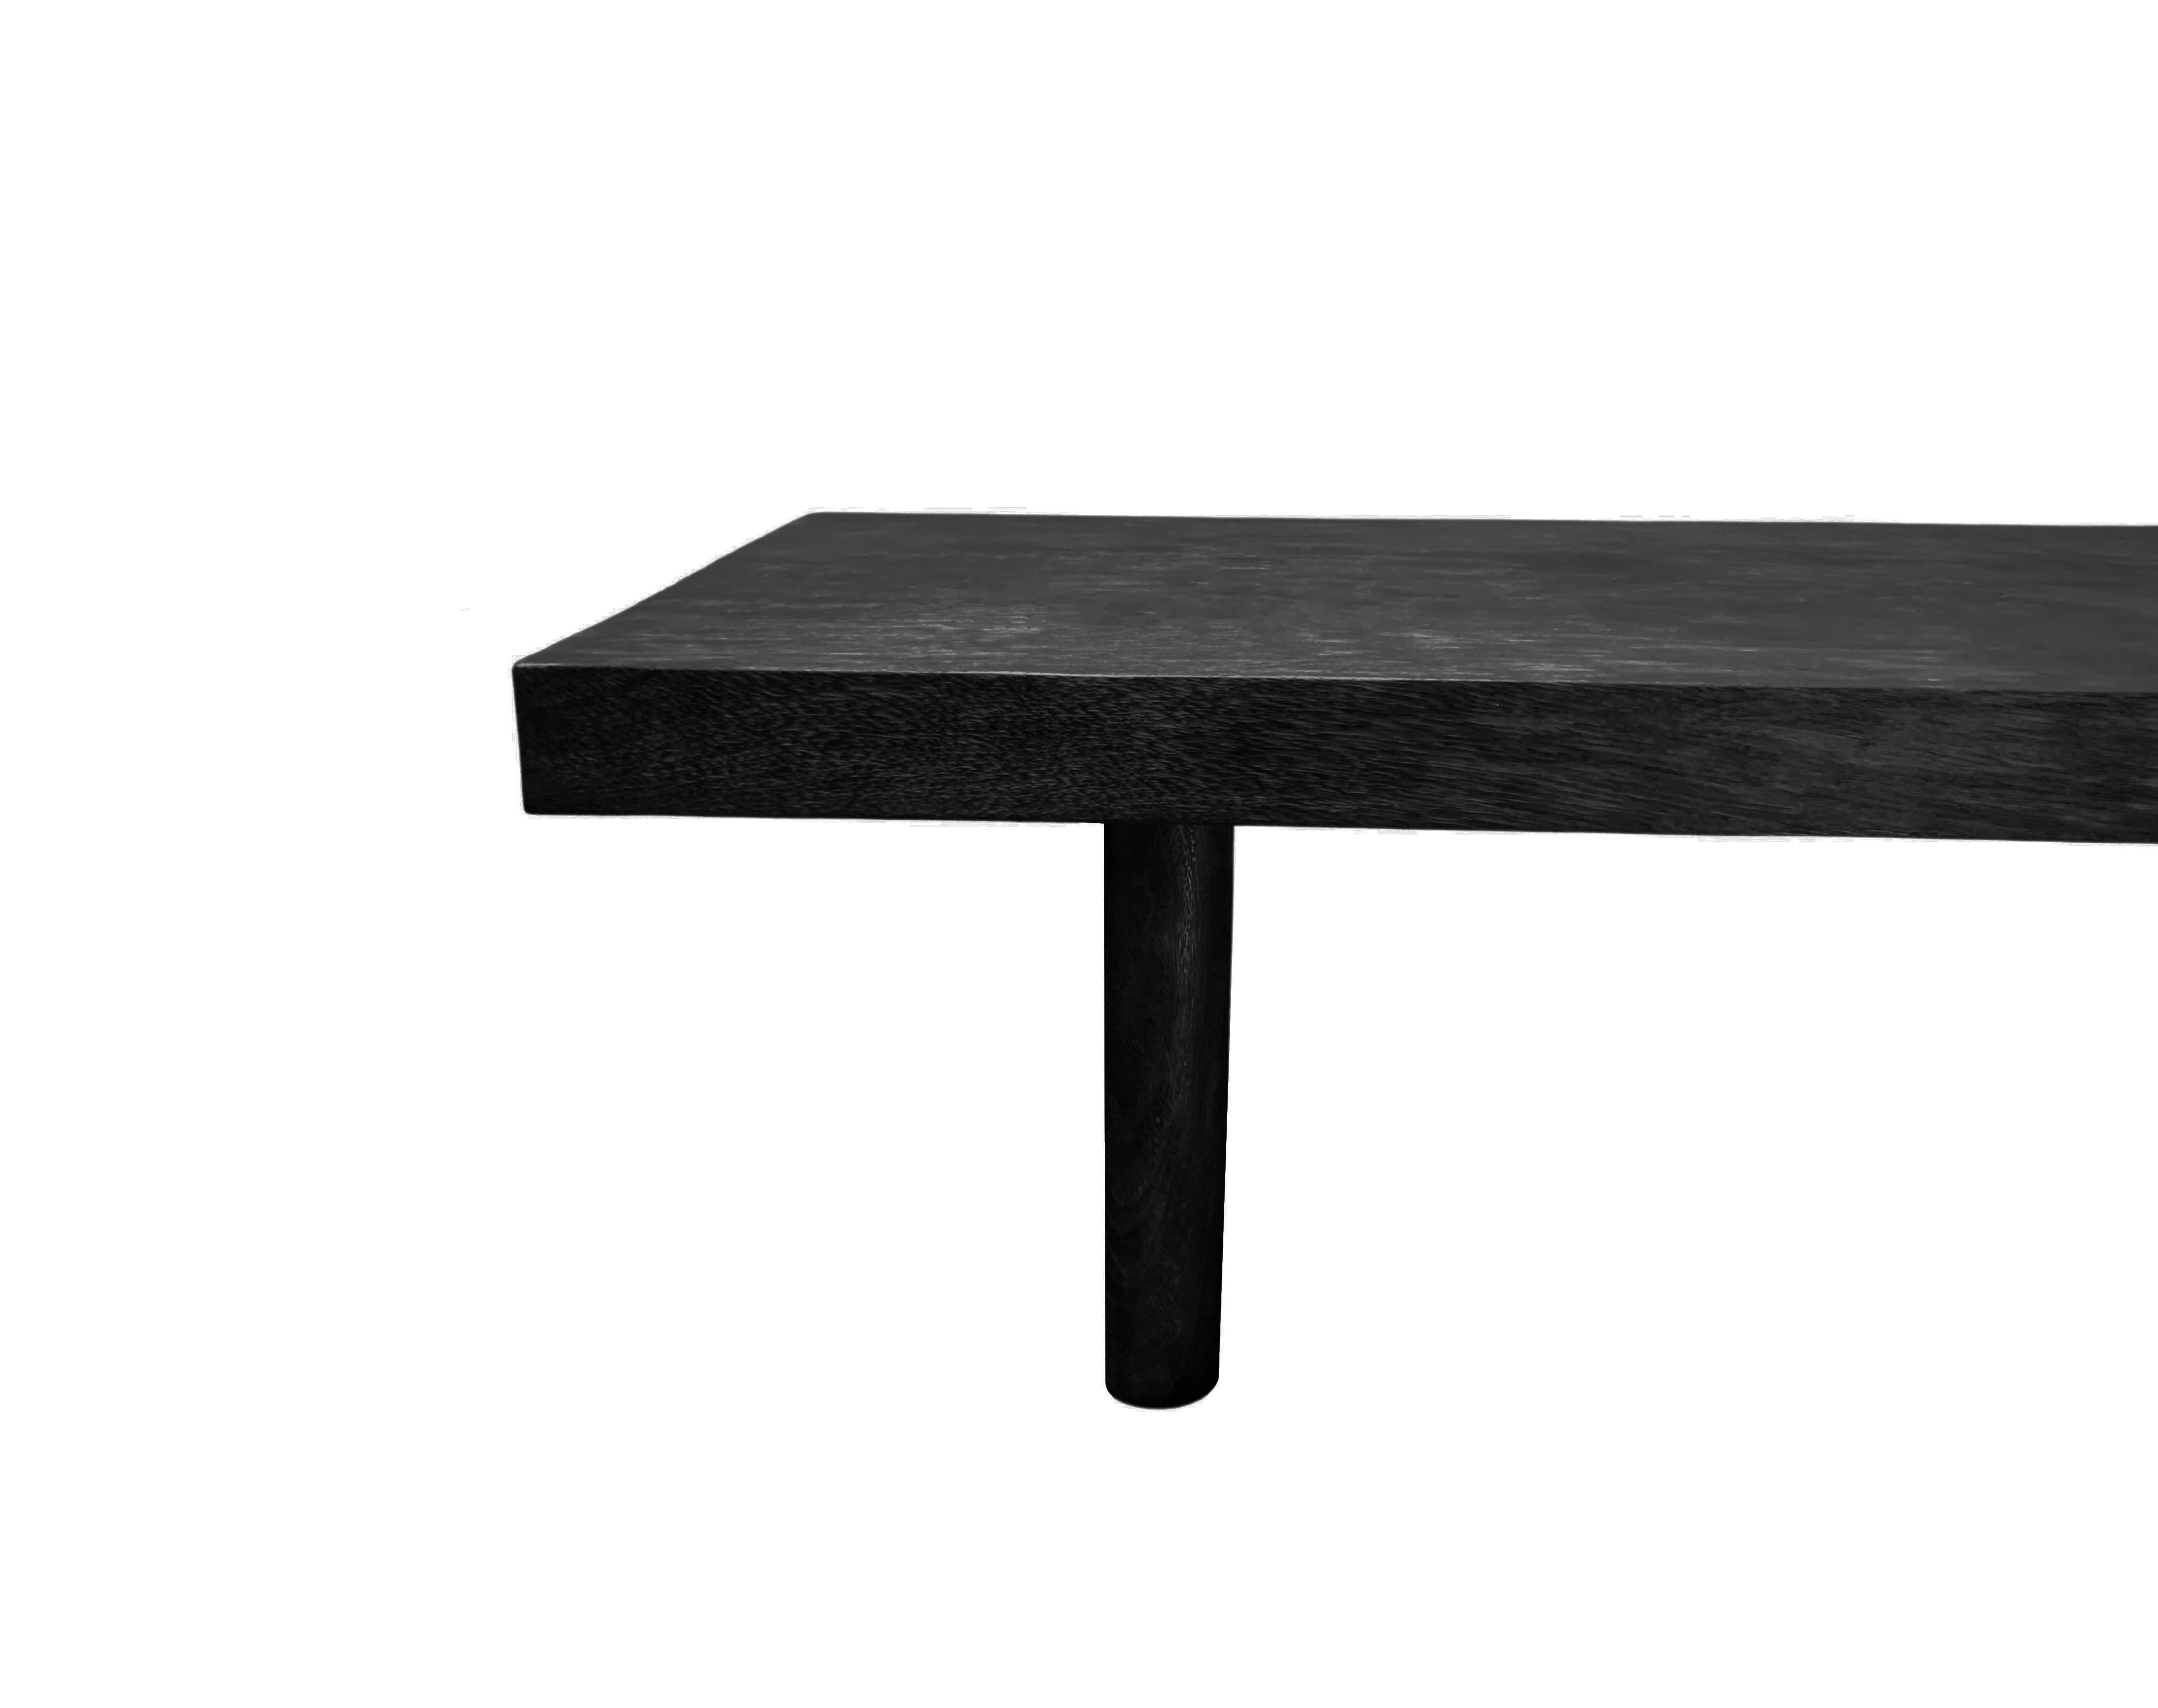 A solid mango wood sofa table with wonderful wood textures and shades. The table top is crafted from a solid slab of mango wood. The table also features two solid legs that span its width and feature curved sides. To achieve its black pigment, the